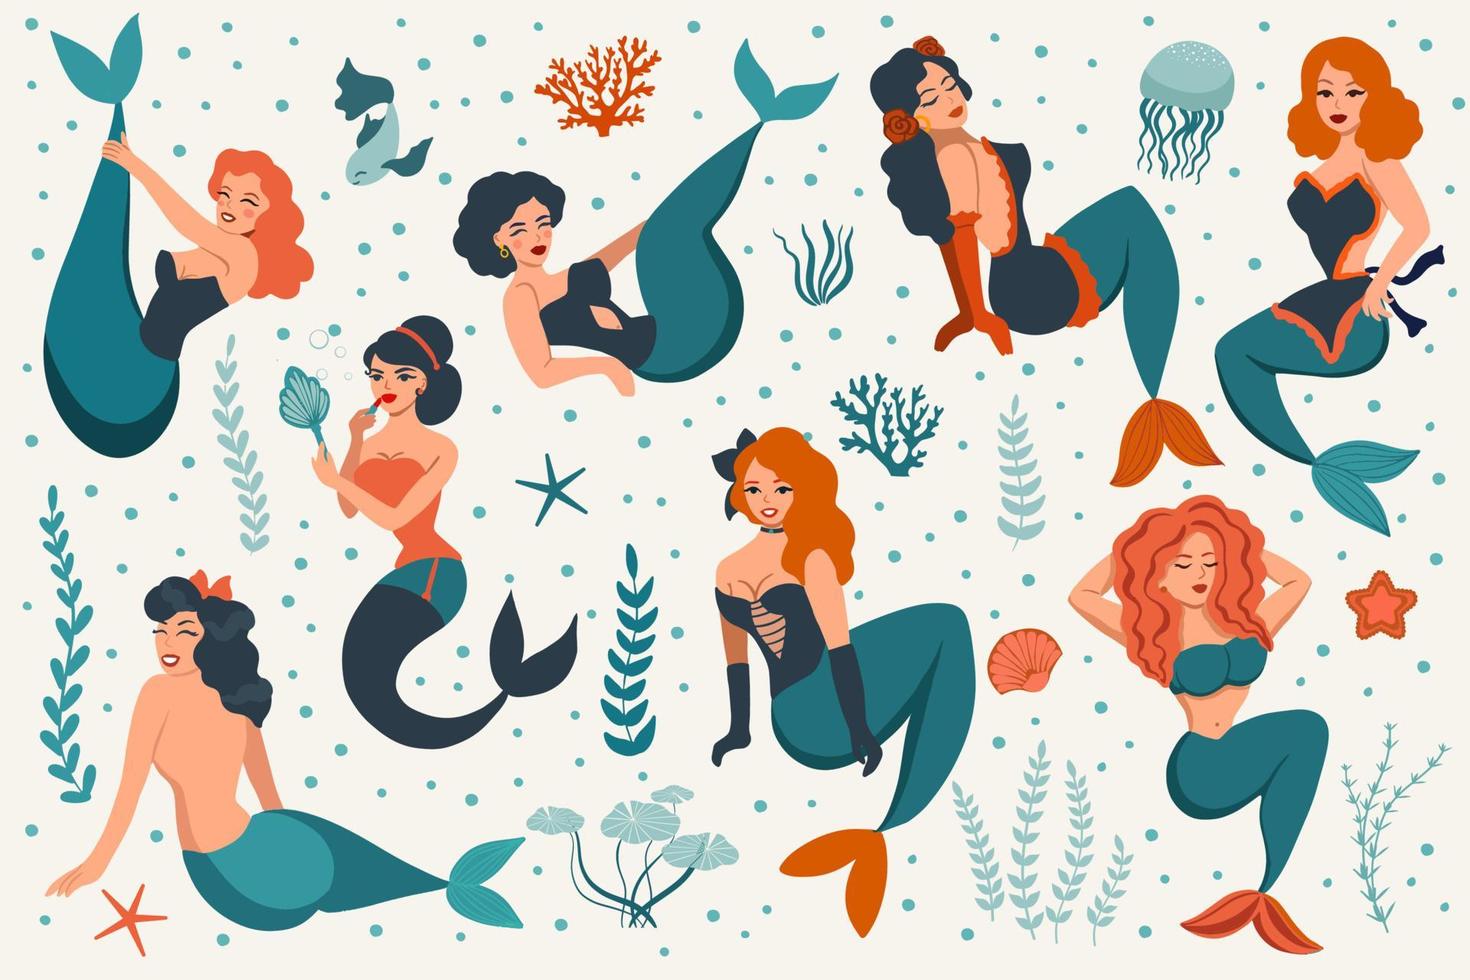 Cute mermaids in retro pin-up style. Collection of vintage women characters. Underwater world vector illustration